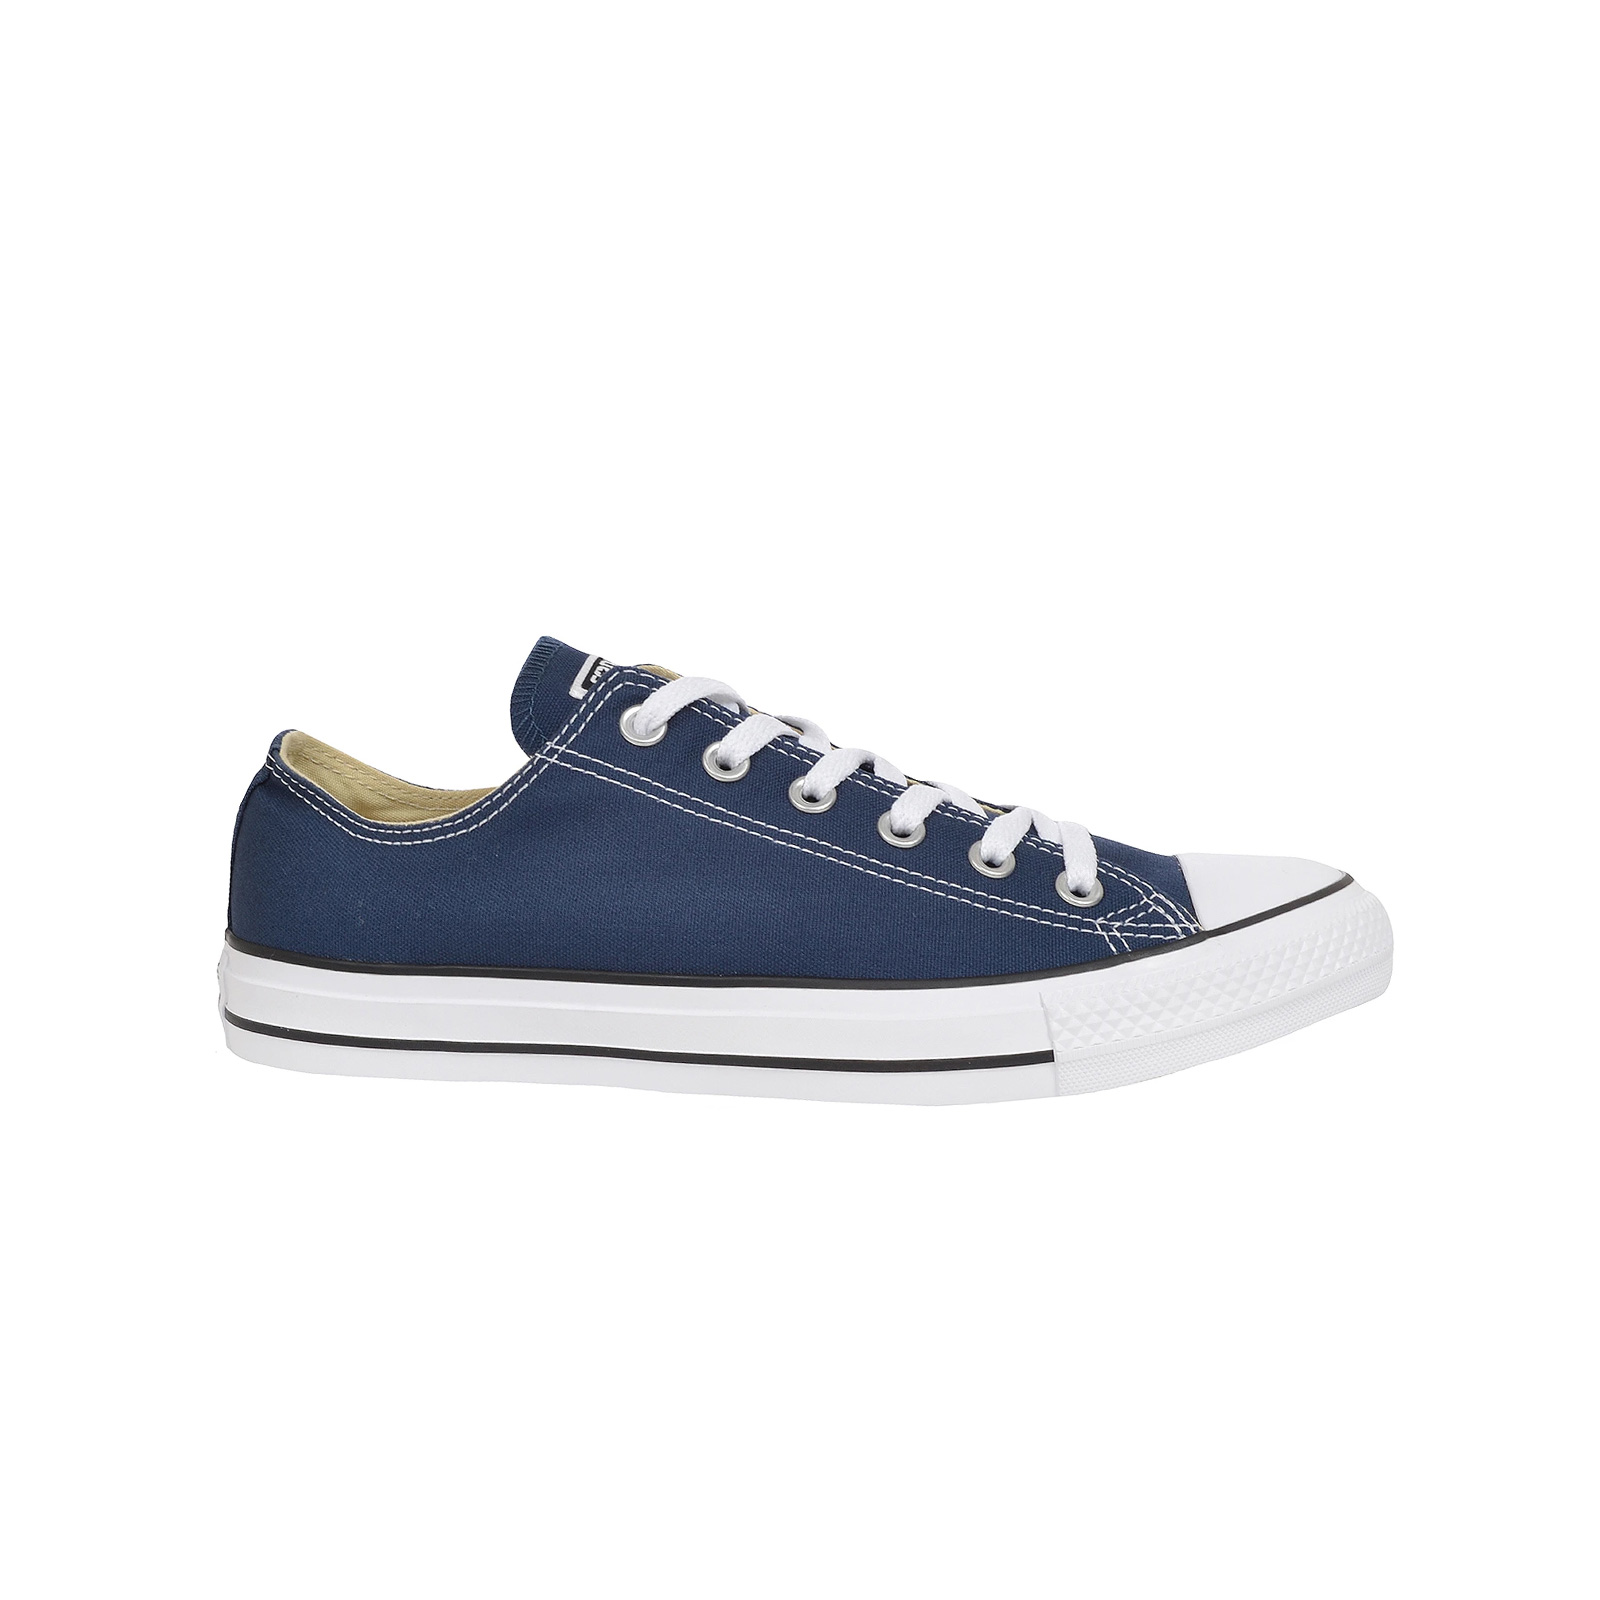 Converse - CHUCK TAYLOR ALL STAR - 410-NAVY Ανδρικά > Παπούτσια > Sneaker > Παπούτσι Low Cut